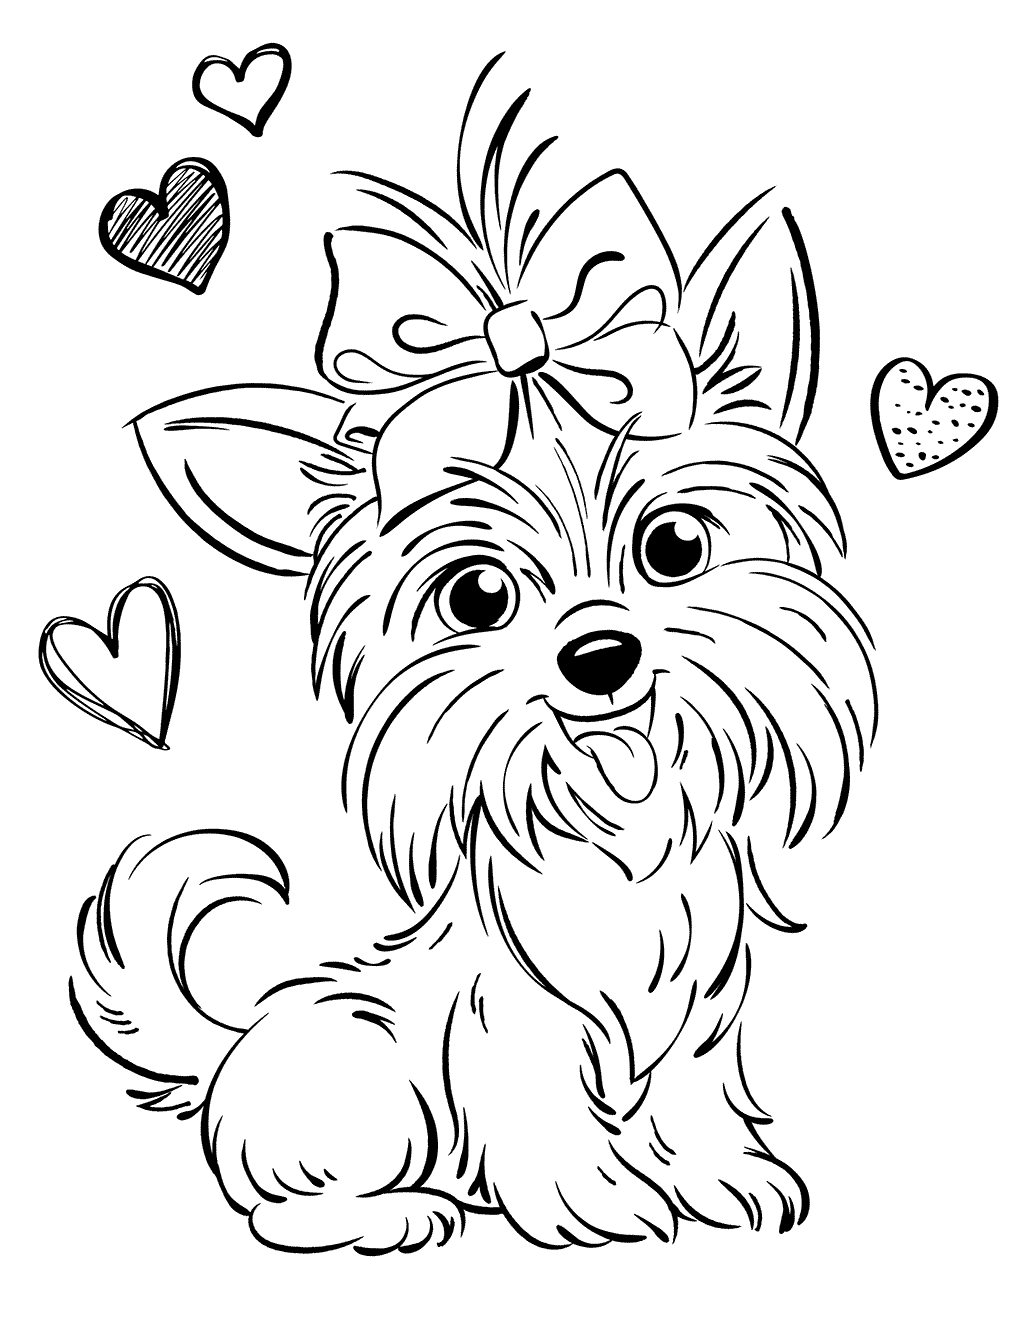 the-dog-bow-bow-of-jojo-siwa-with-hearts-coloring-page-free-printable-coloring-pages